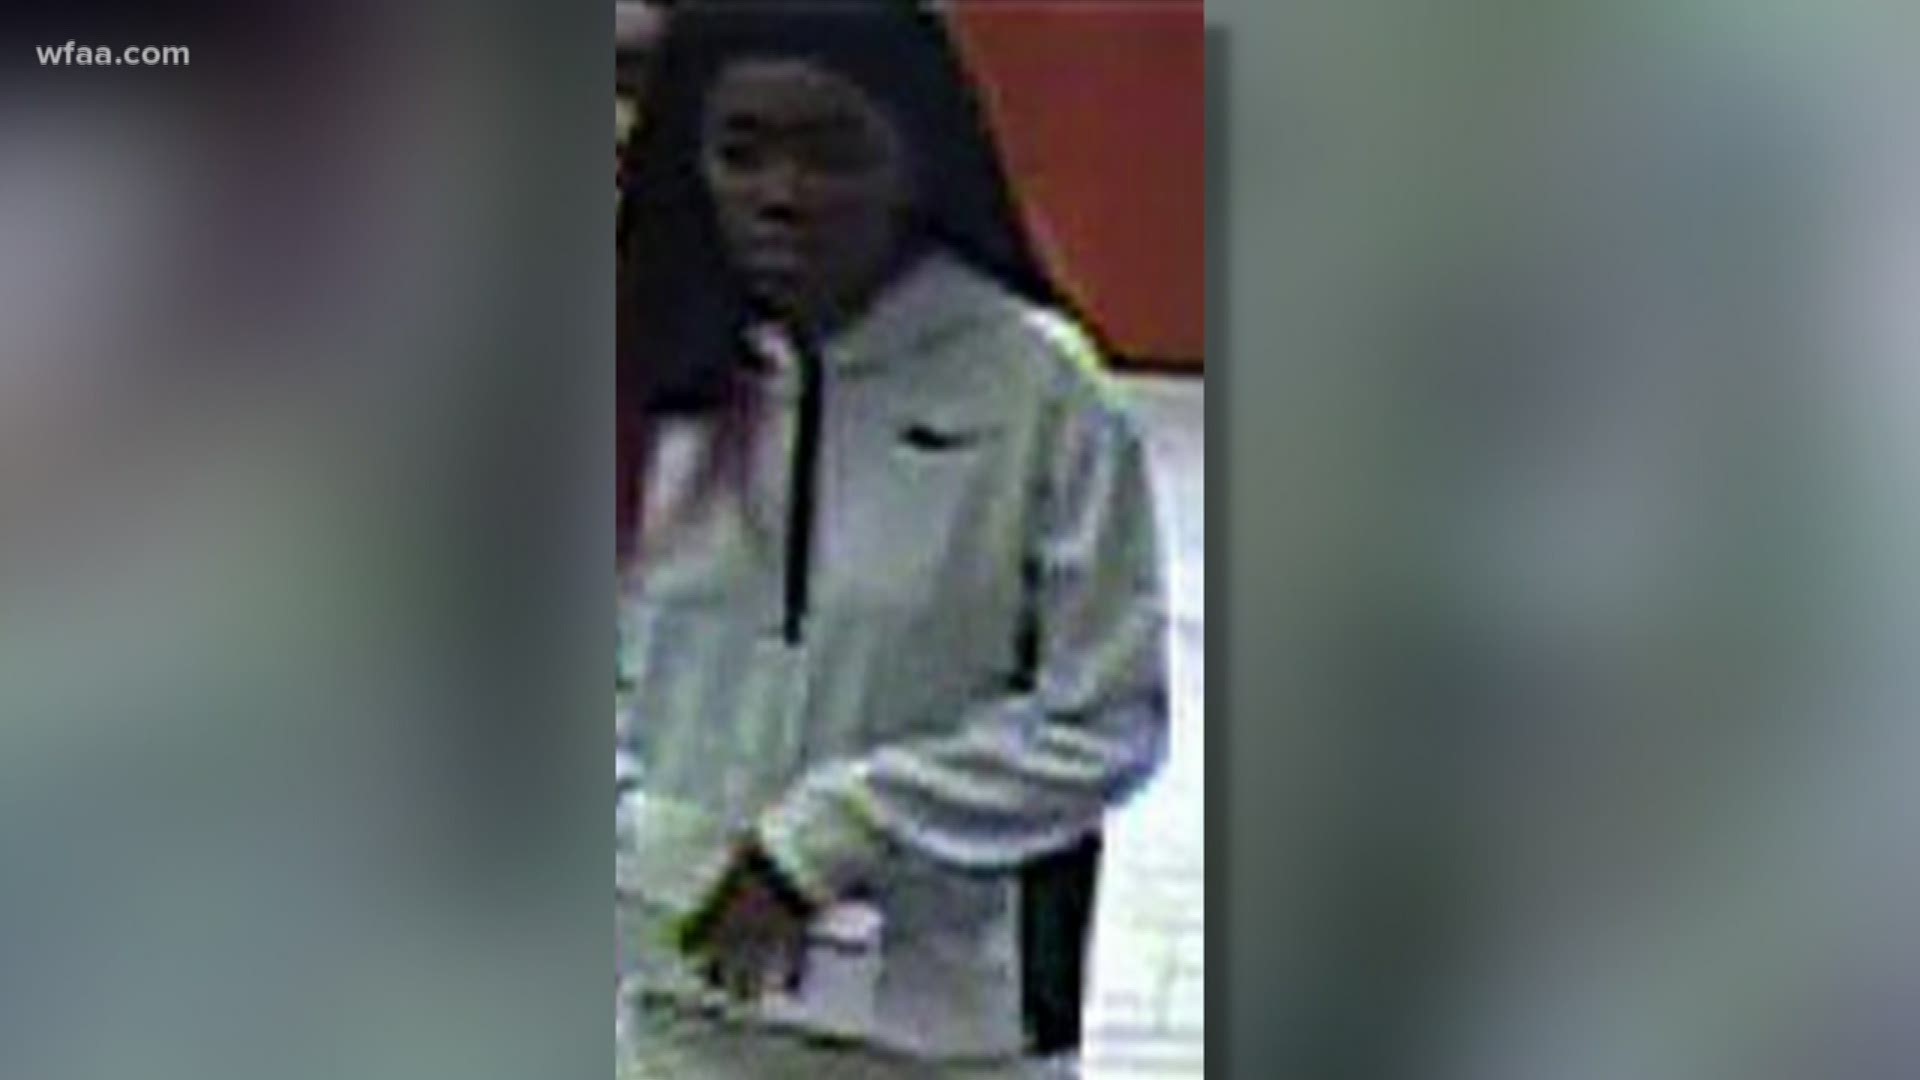 The same woman is believed to be responsible for three separate bank robberies in Arlington and Fort Worth in the past week.